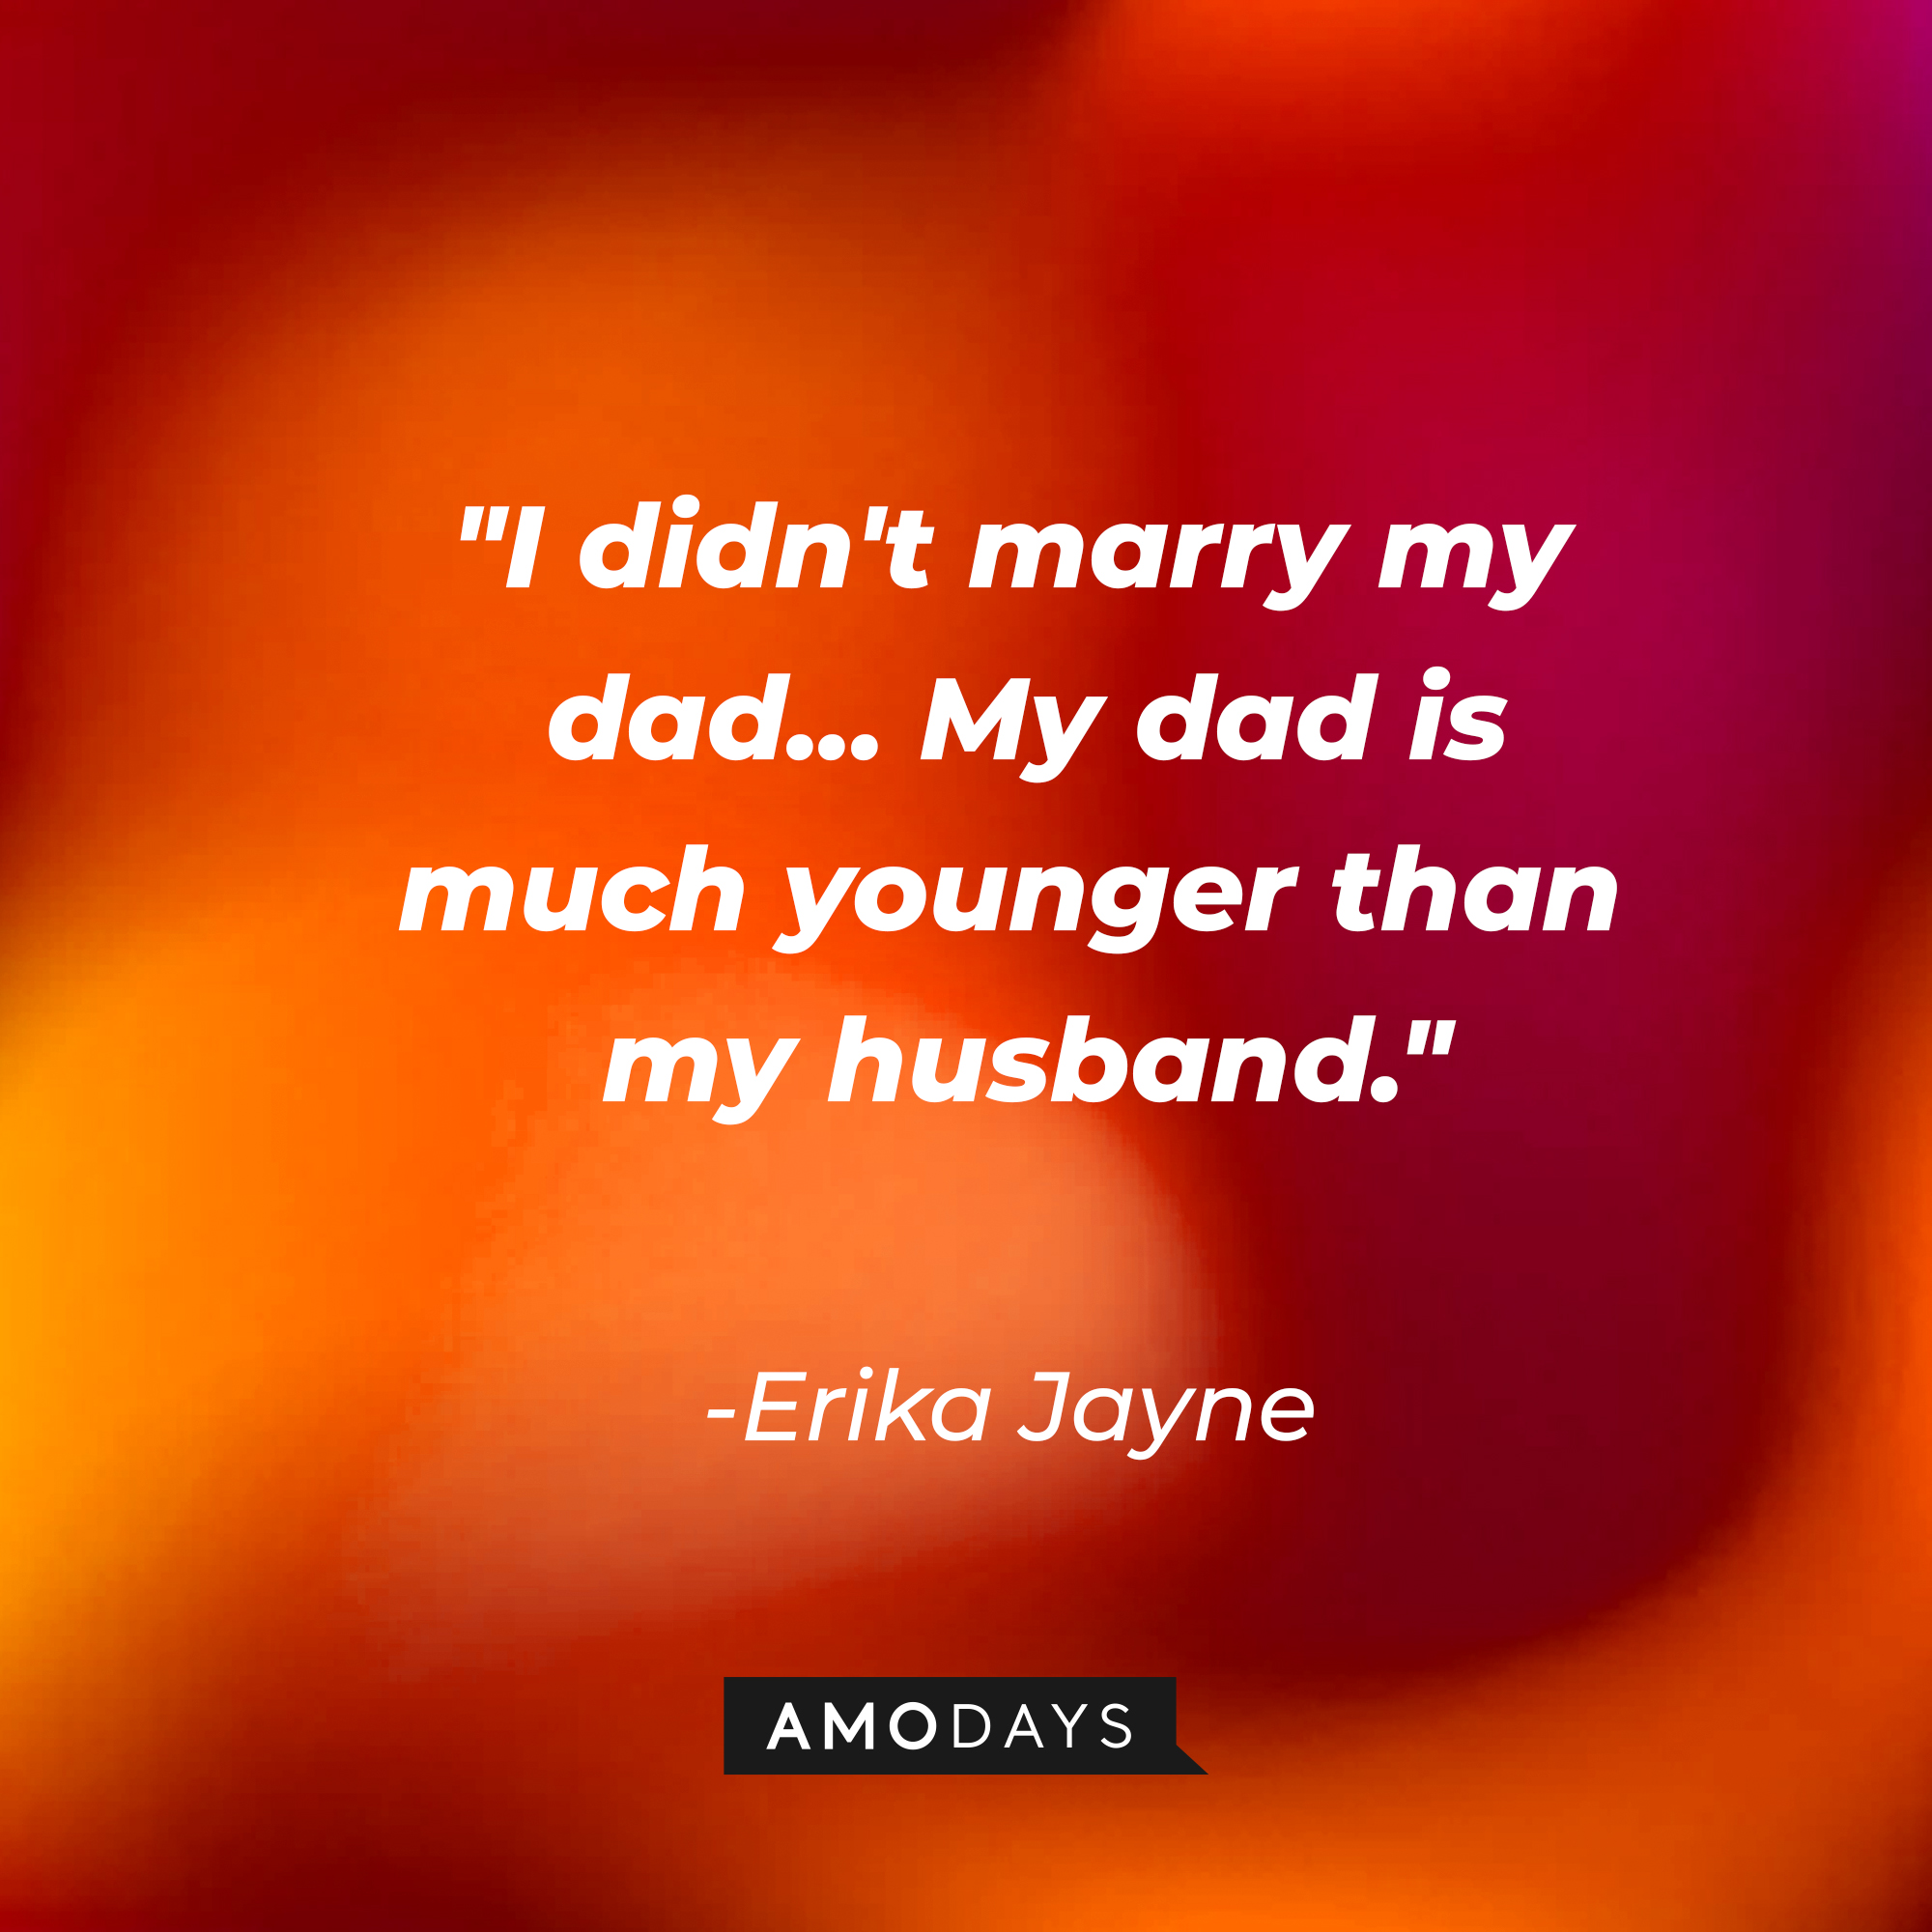 Erika Jayne’s quote: "I didn't marry my dad... My dad is much younger than my husband." | Image: Amodays